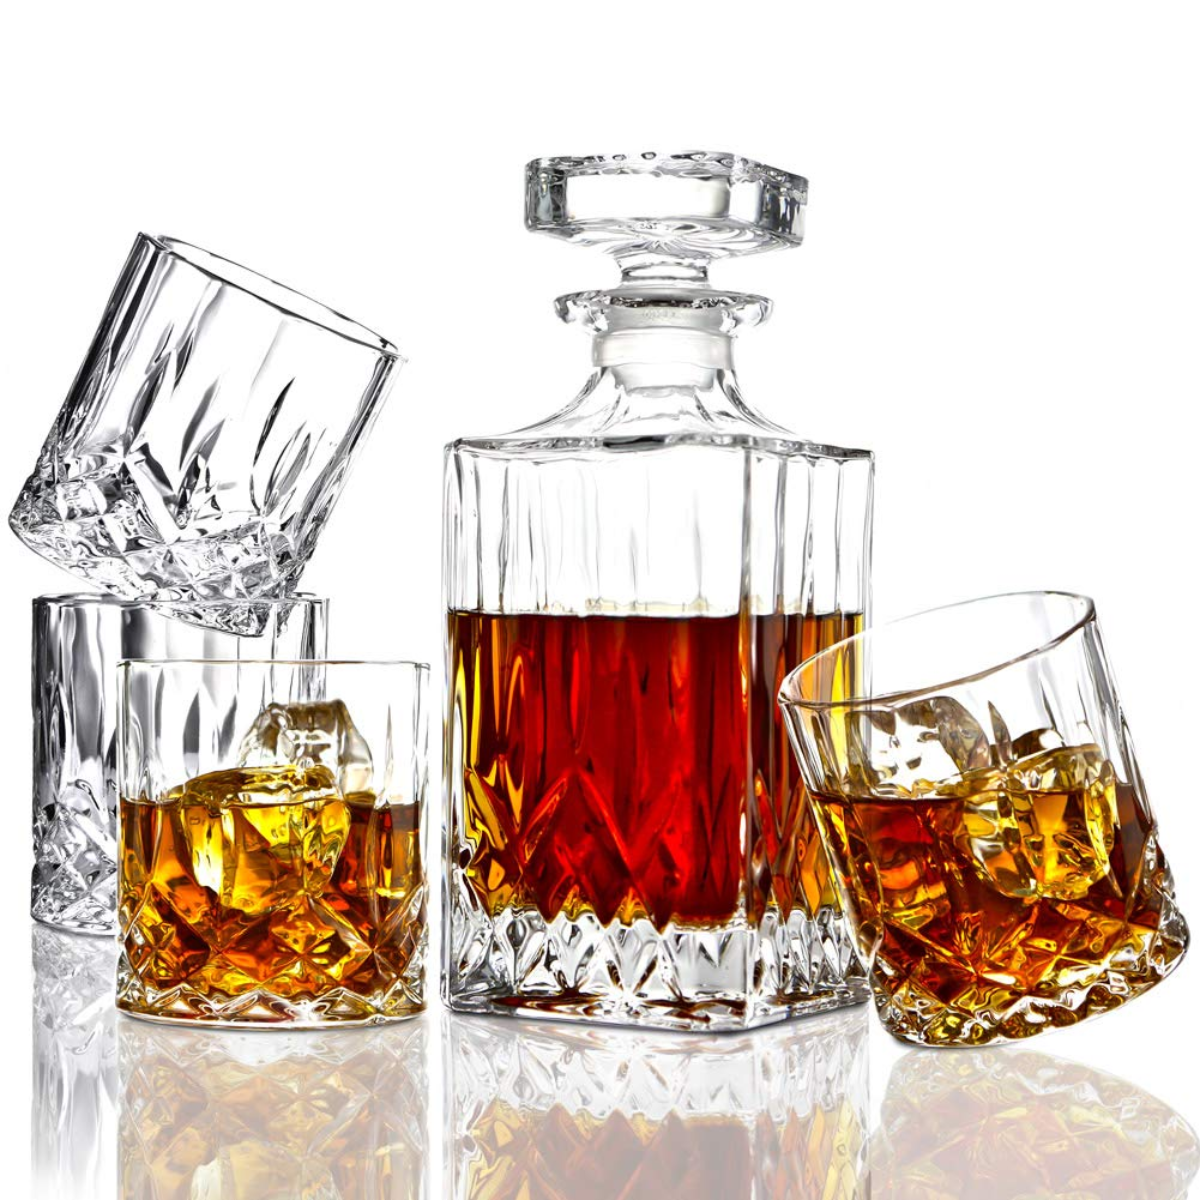 2. Toast to 15 Years of Love with a Stunning Crystal Decanter Set